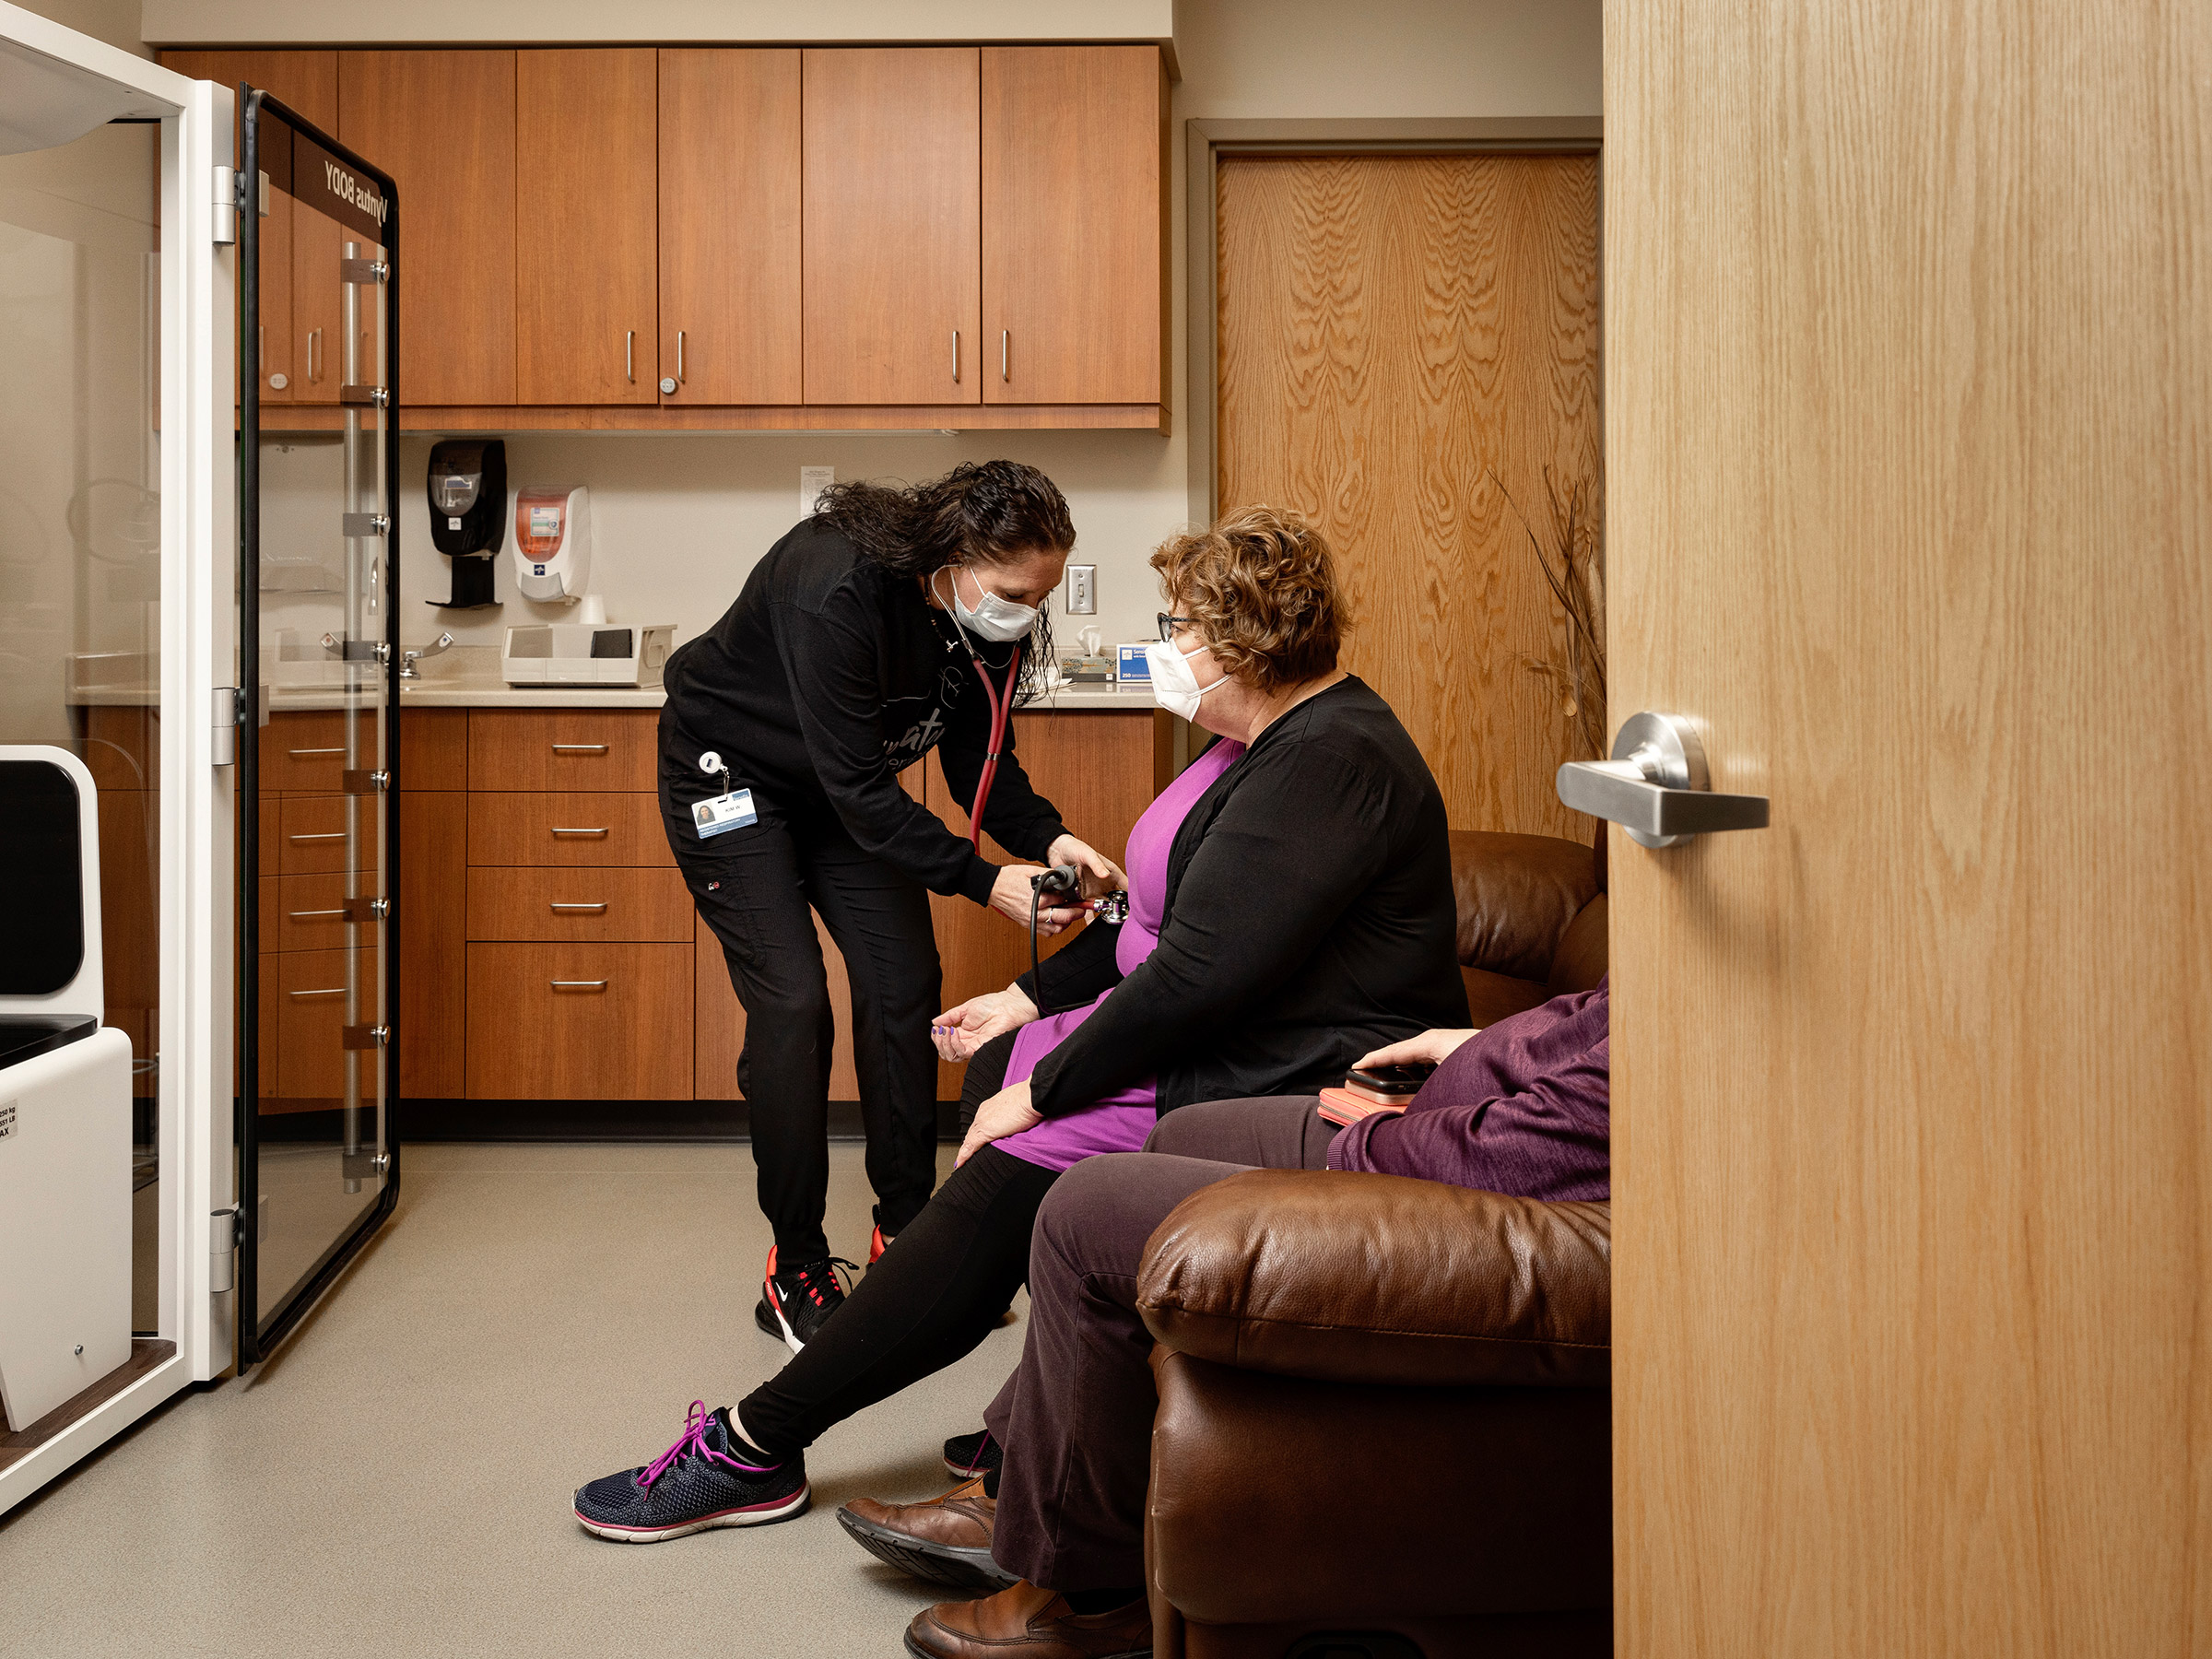 Amber Rausch’s blood pressure is taken during Long COVID testing (Rebecca Stumpf for TIME)